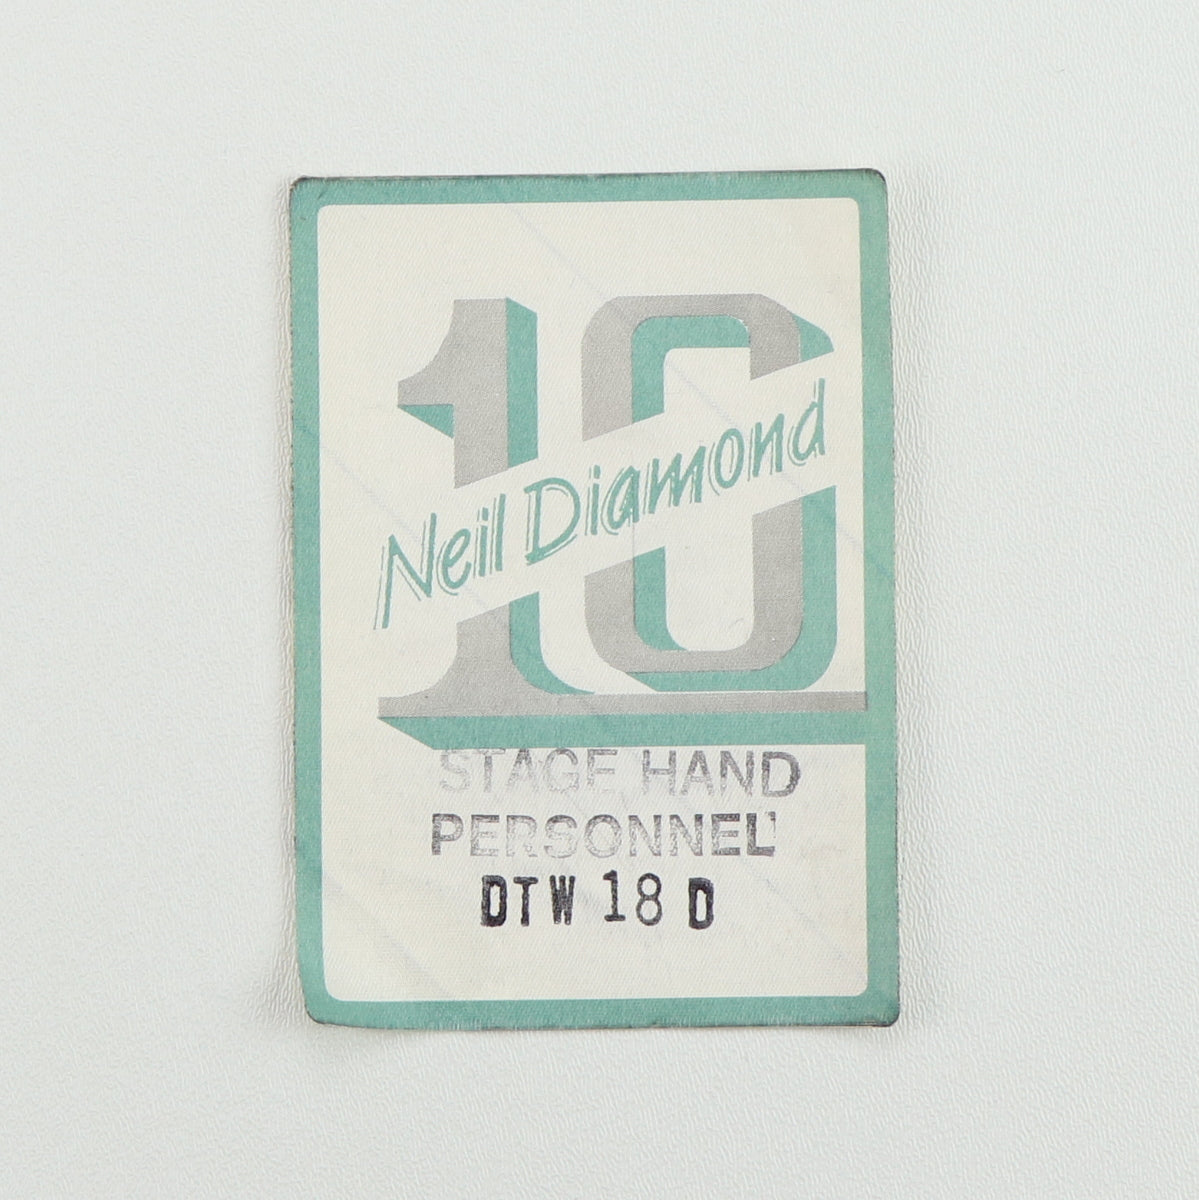 1982 Neil Diamond Tour Stage Hand / Personnel Backstage Pass